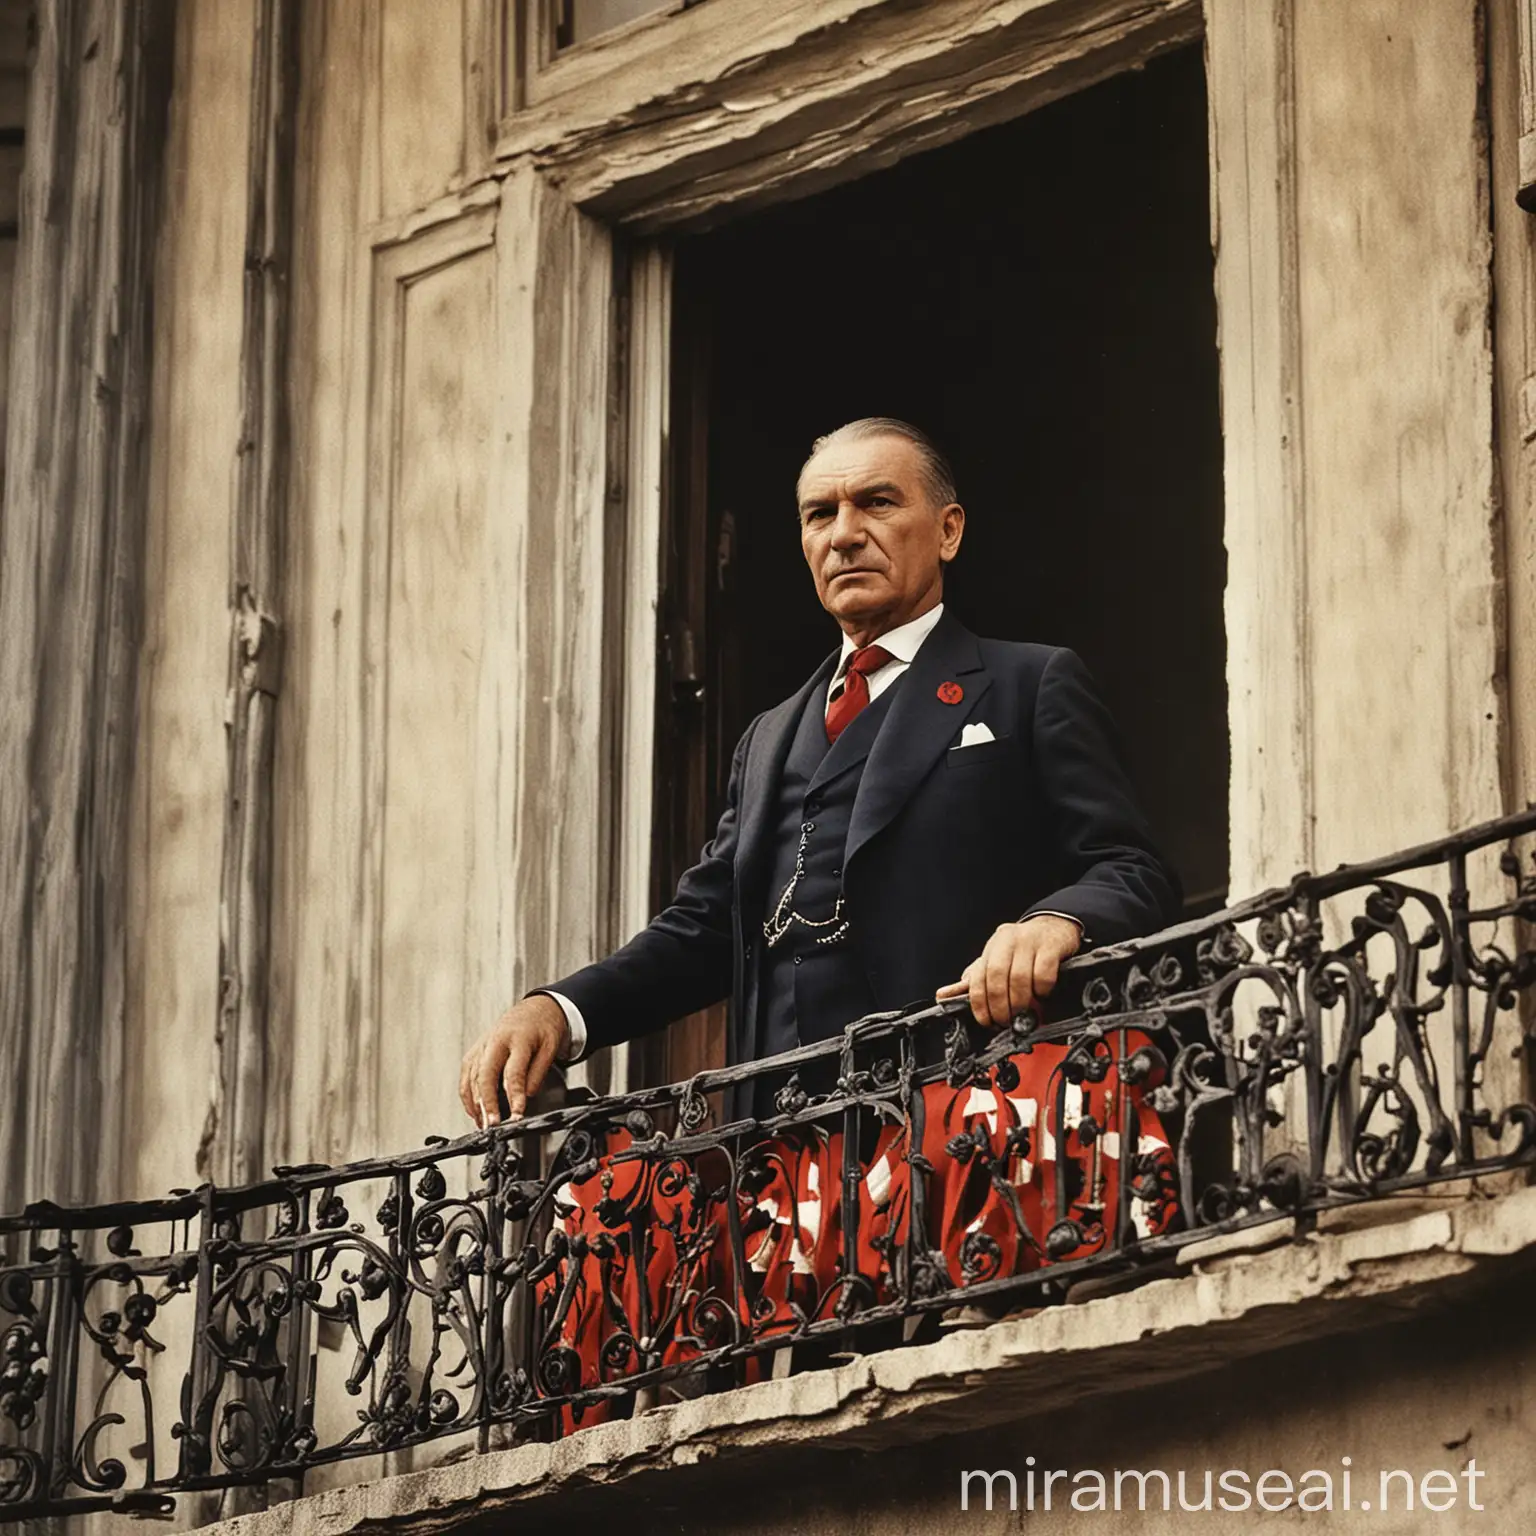 Mustafa Kemal Atatrk Observing the Crowd from His Balcony in Vibrant Colors